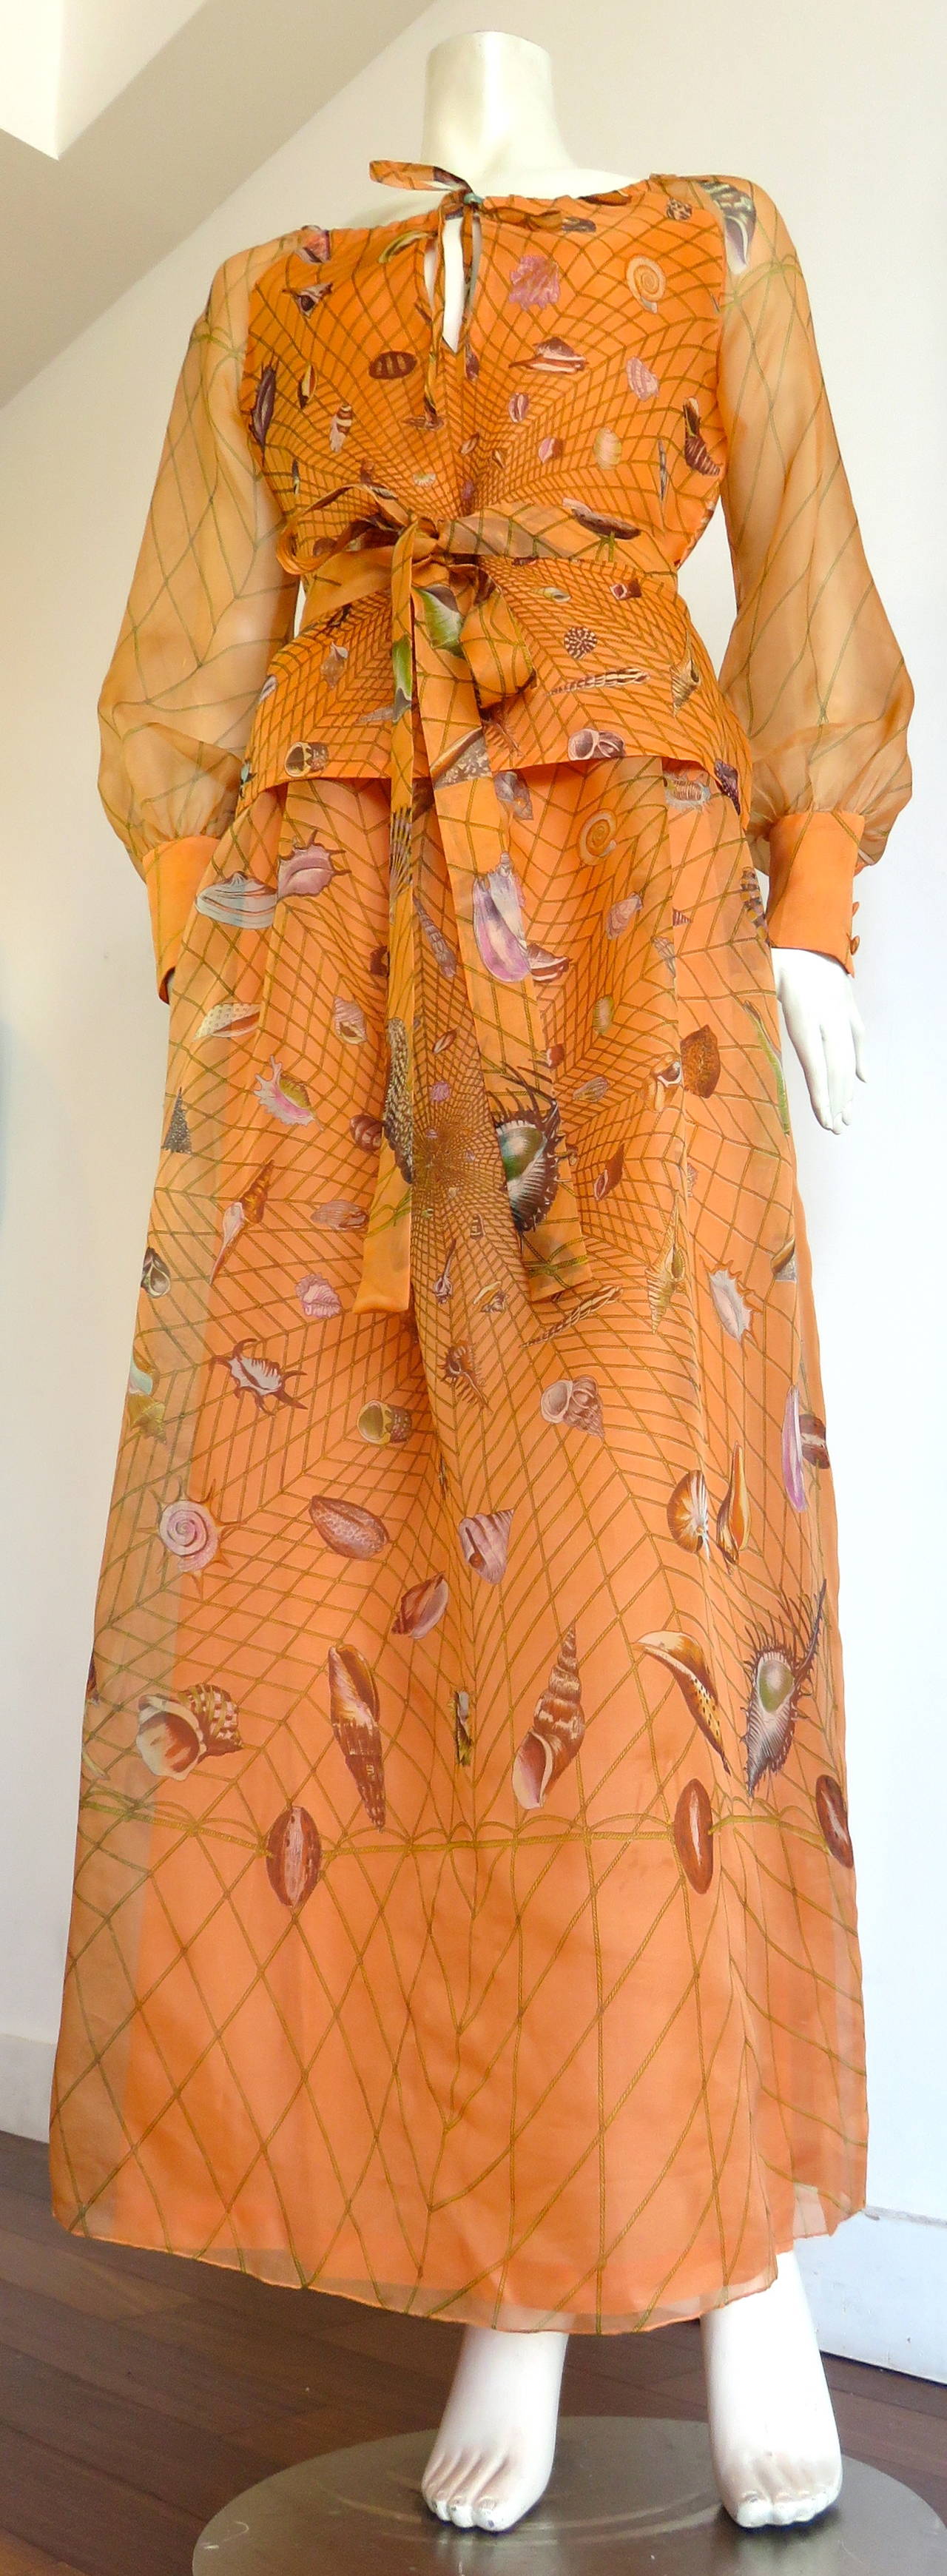 Worn once, 1970's, GUCCI Seashell printed, 100% silk organza 2pc. dress set.

Original 1970's edition of Gucci's classic seashell artwork in a gorgeous apricot/tangerine ground color comprised of a top, skirt, and matching belt/sash.

The highly